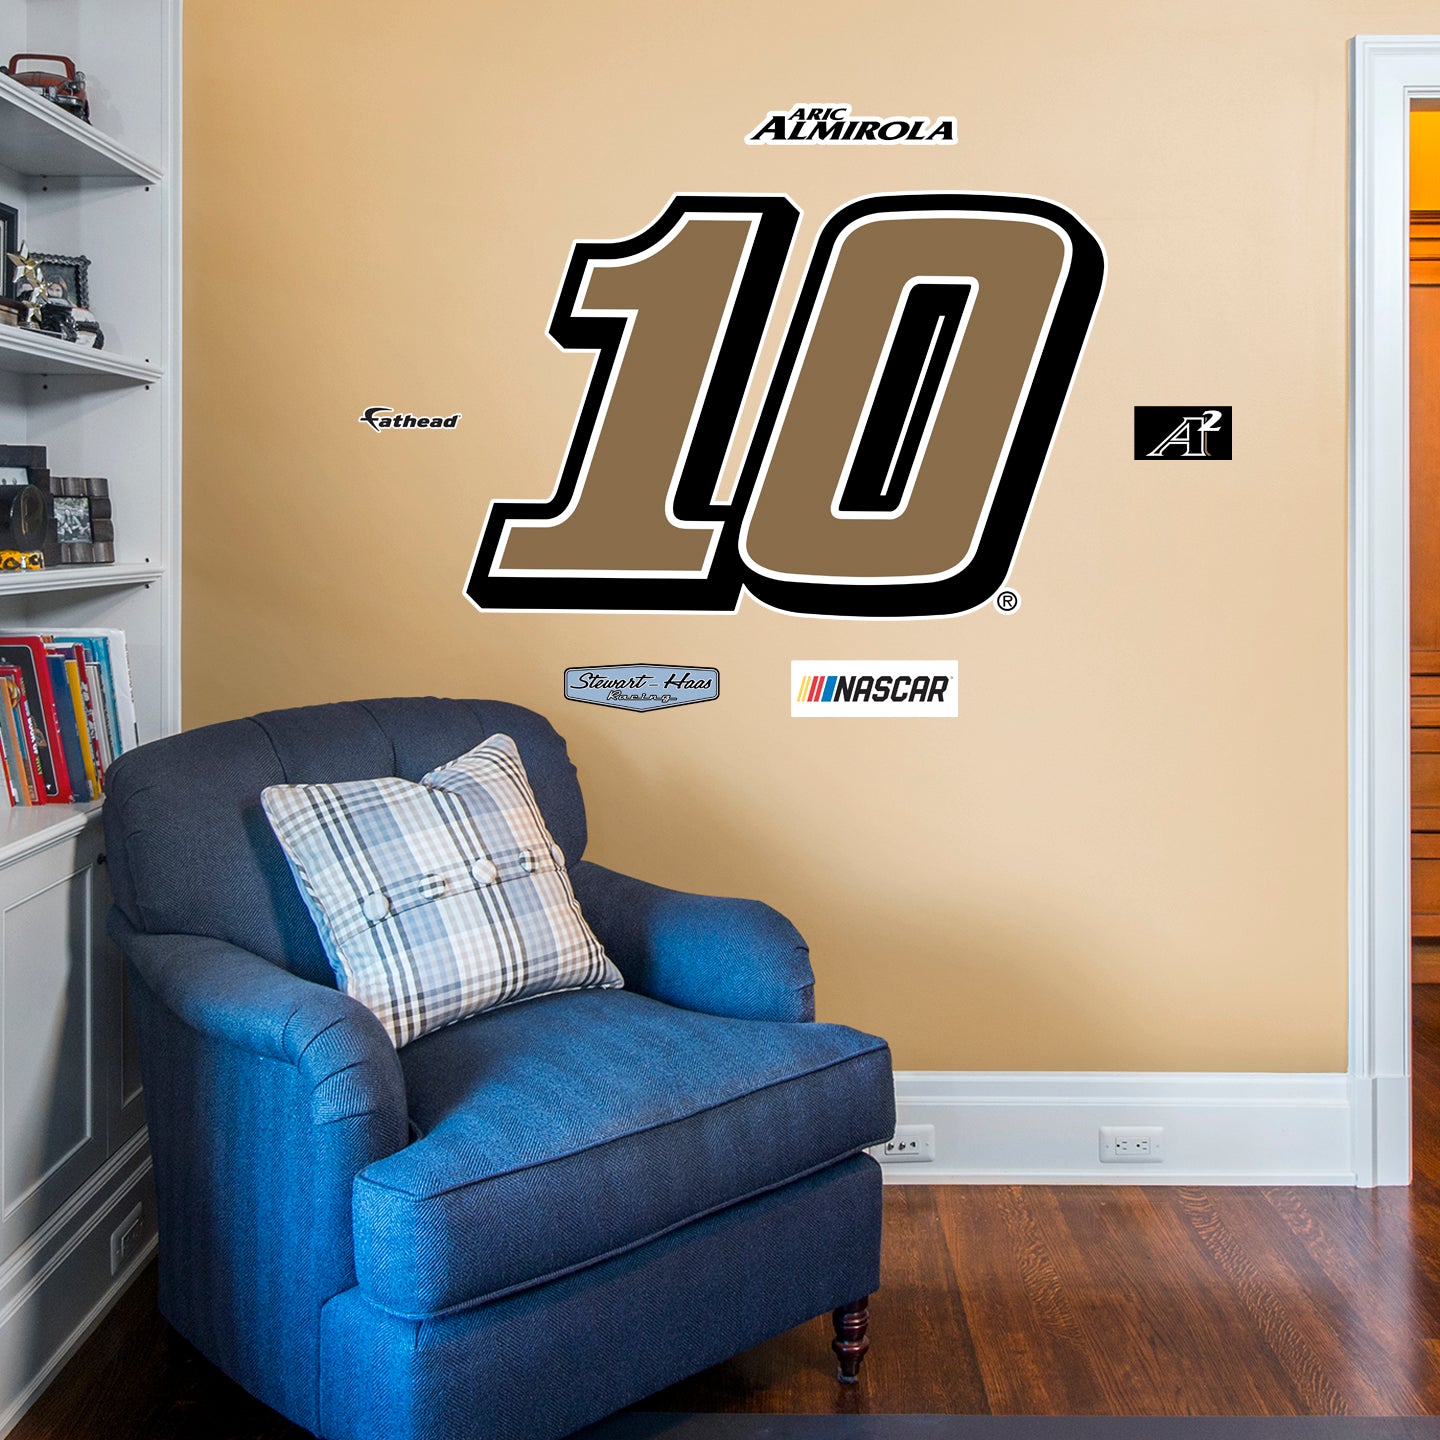 Aric Almirola 2021 #10 Logo - Officially Licensed NASCAR Removable Wall Decal Giant Logo + 4 Decals (49"W x 33"H) by Fathead | V